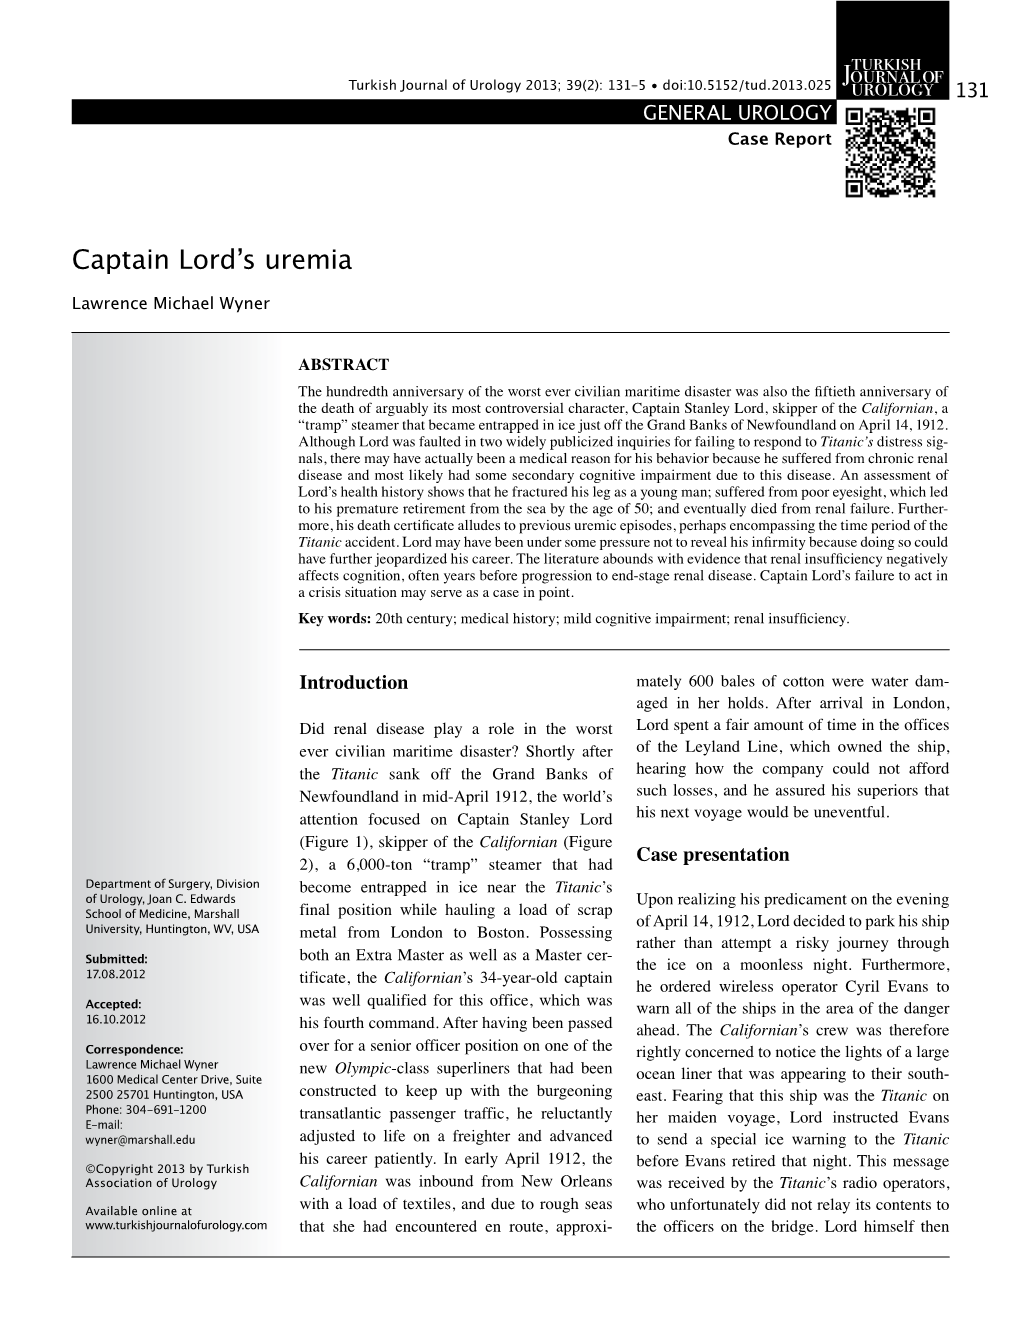 Captain Lord's Uremia